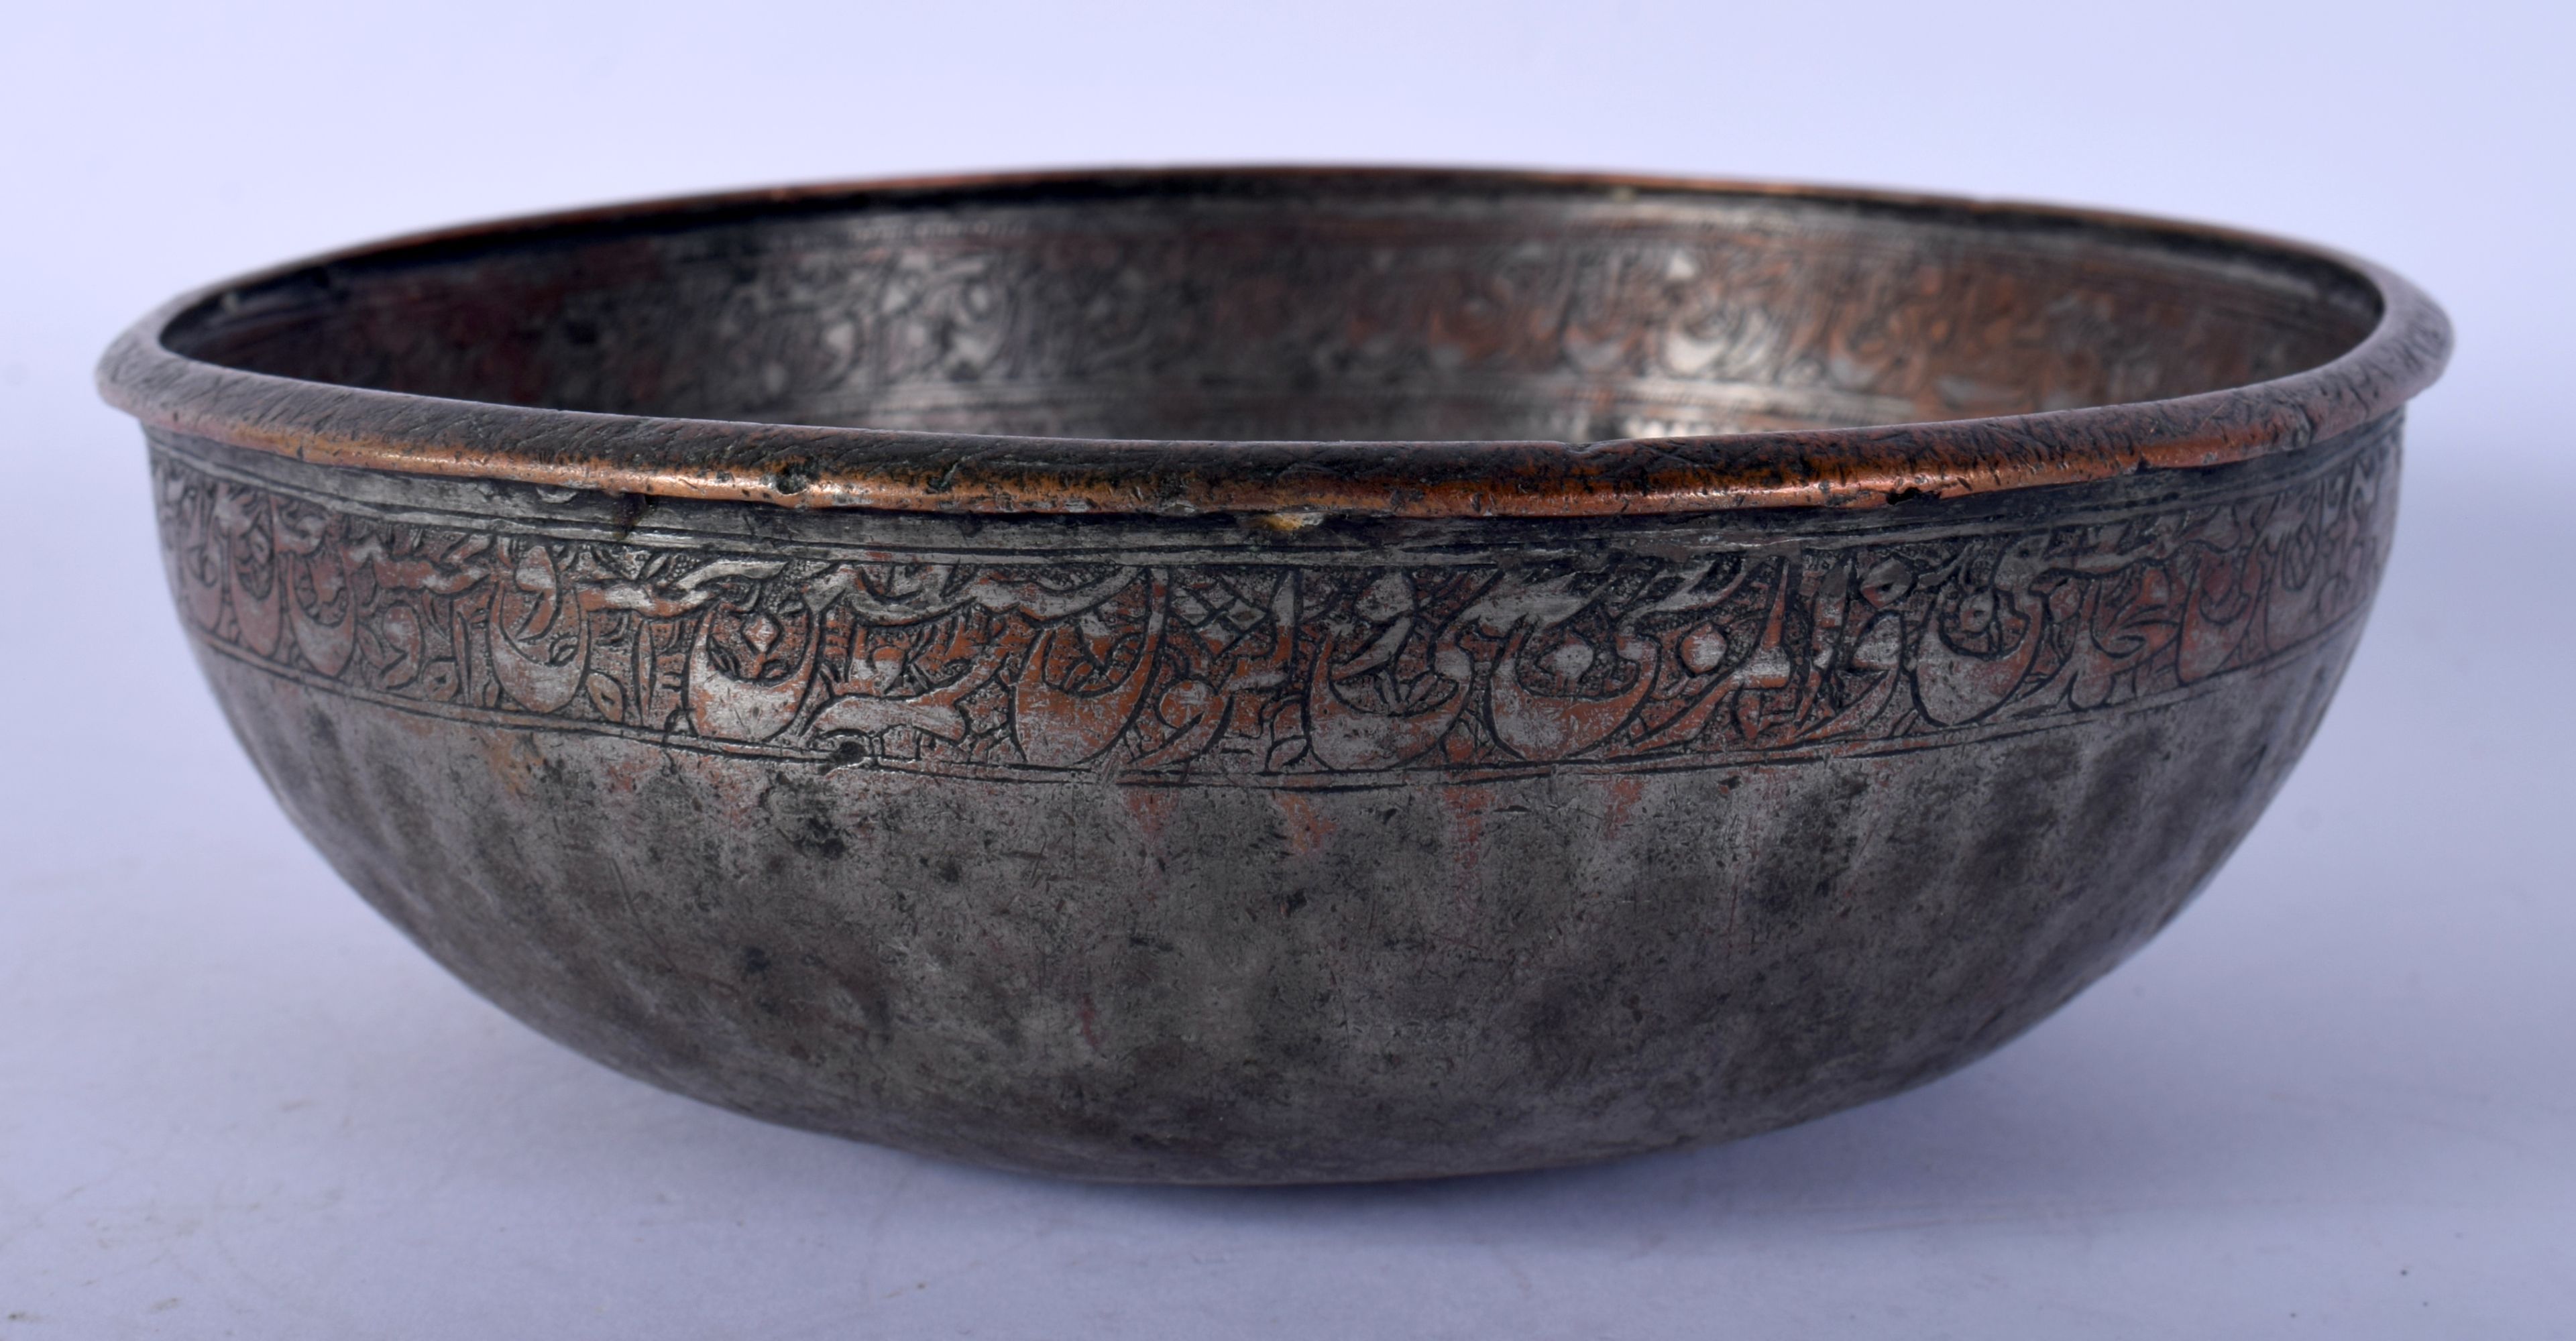 A PERSIAN COPPER ALLOY TINNED CALLIGRAPHY BOWL. 16 cm diameter. - Image 2 of 4